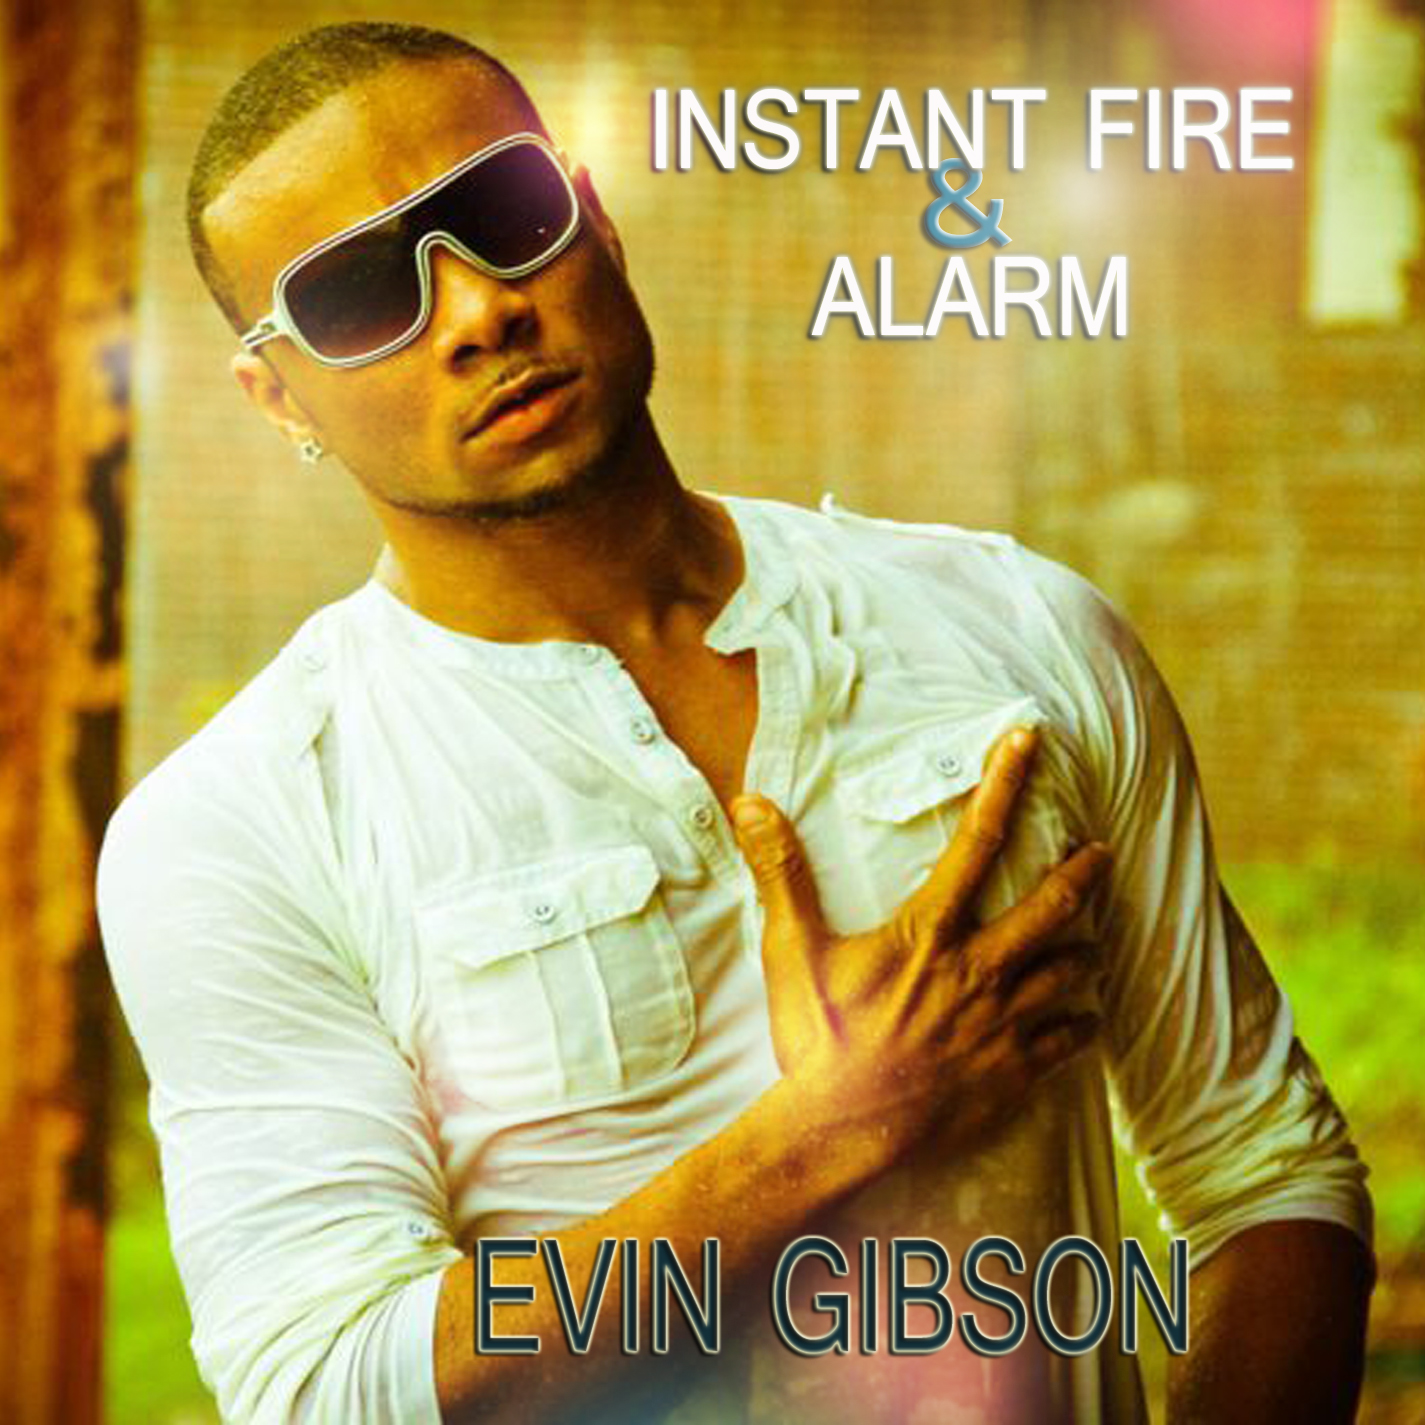  Evin Gibson – “Instant Fire” & “Alarm”